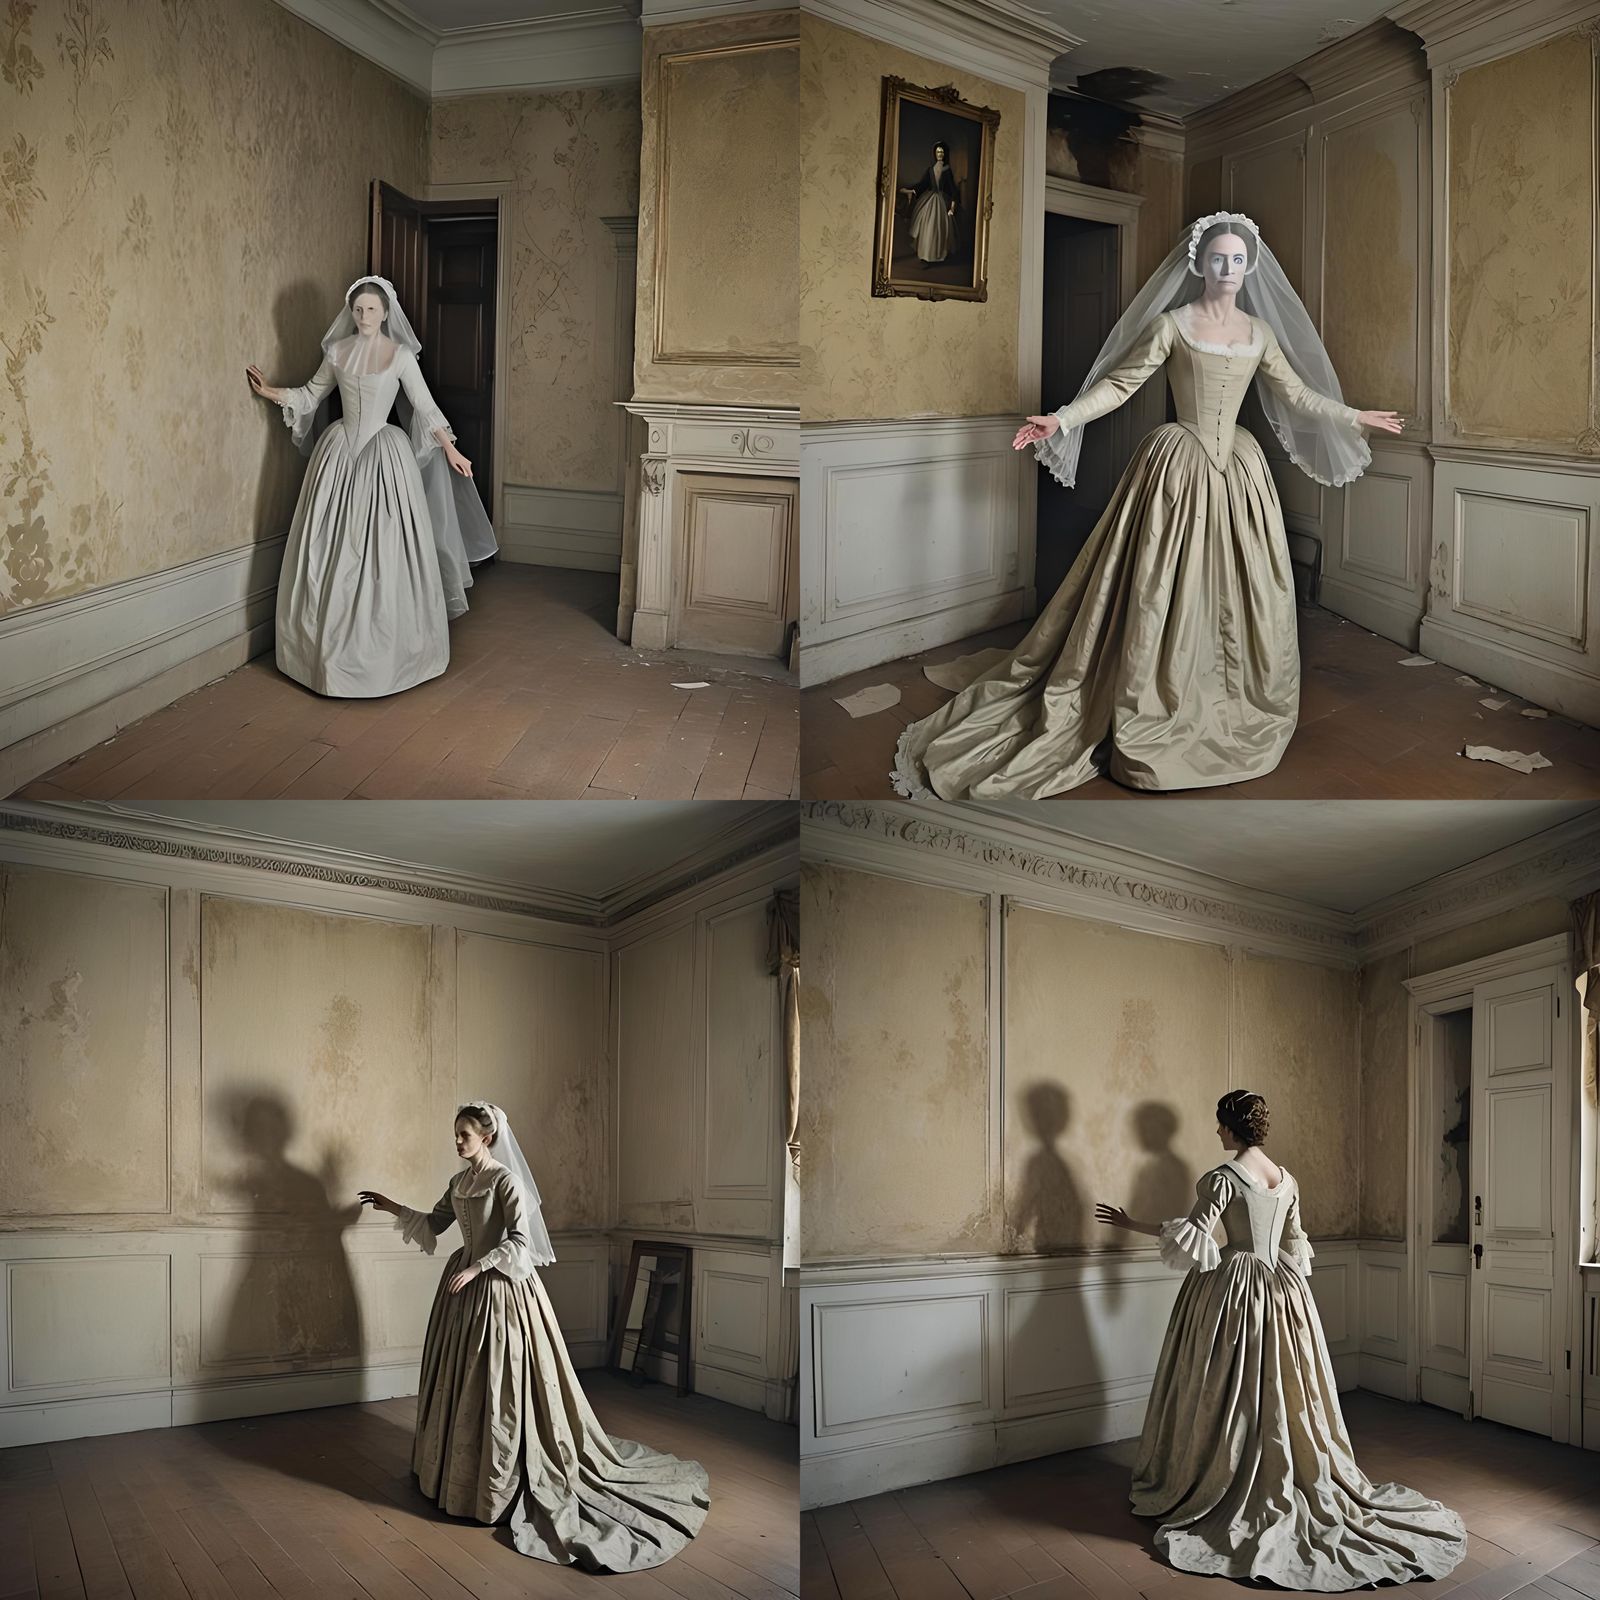 Create image in a 18th century bedroom of a large house. The atmosphere ...